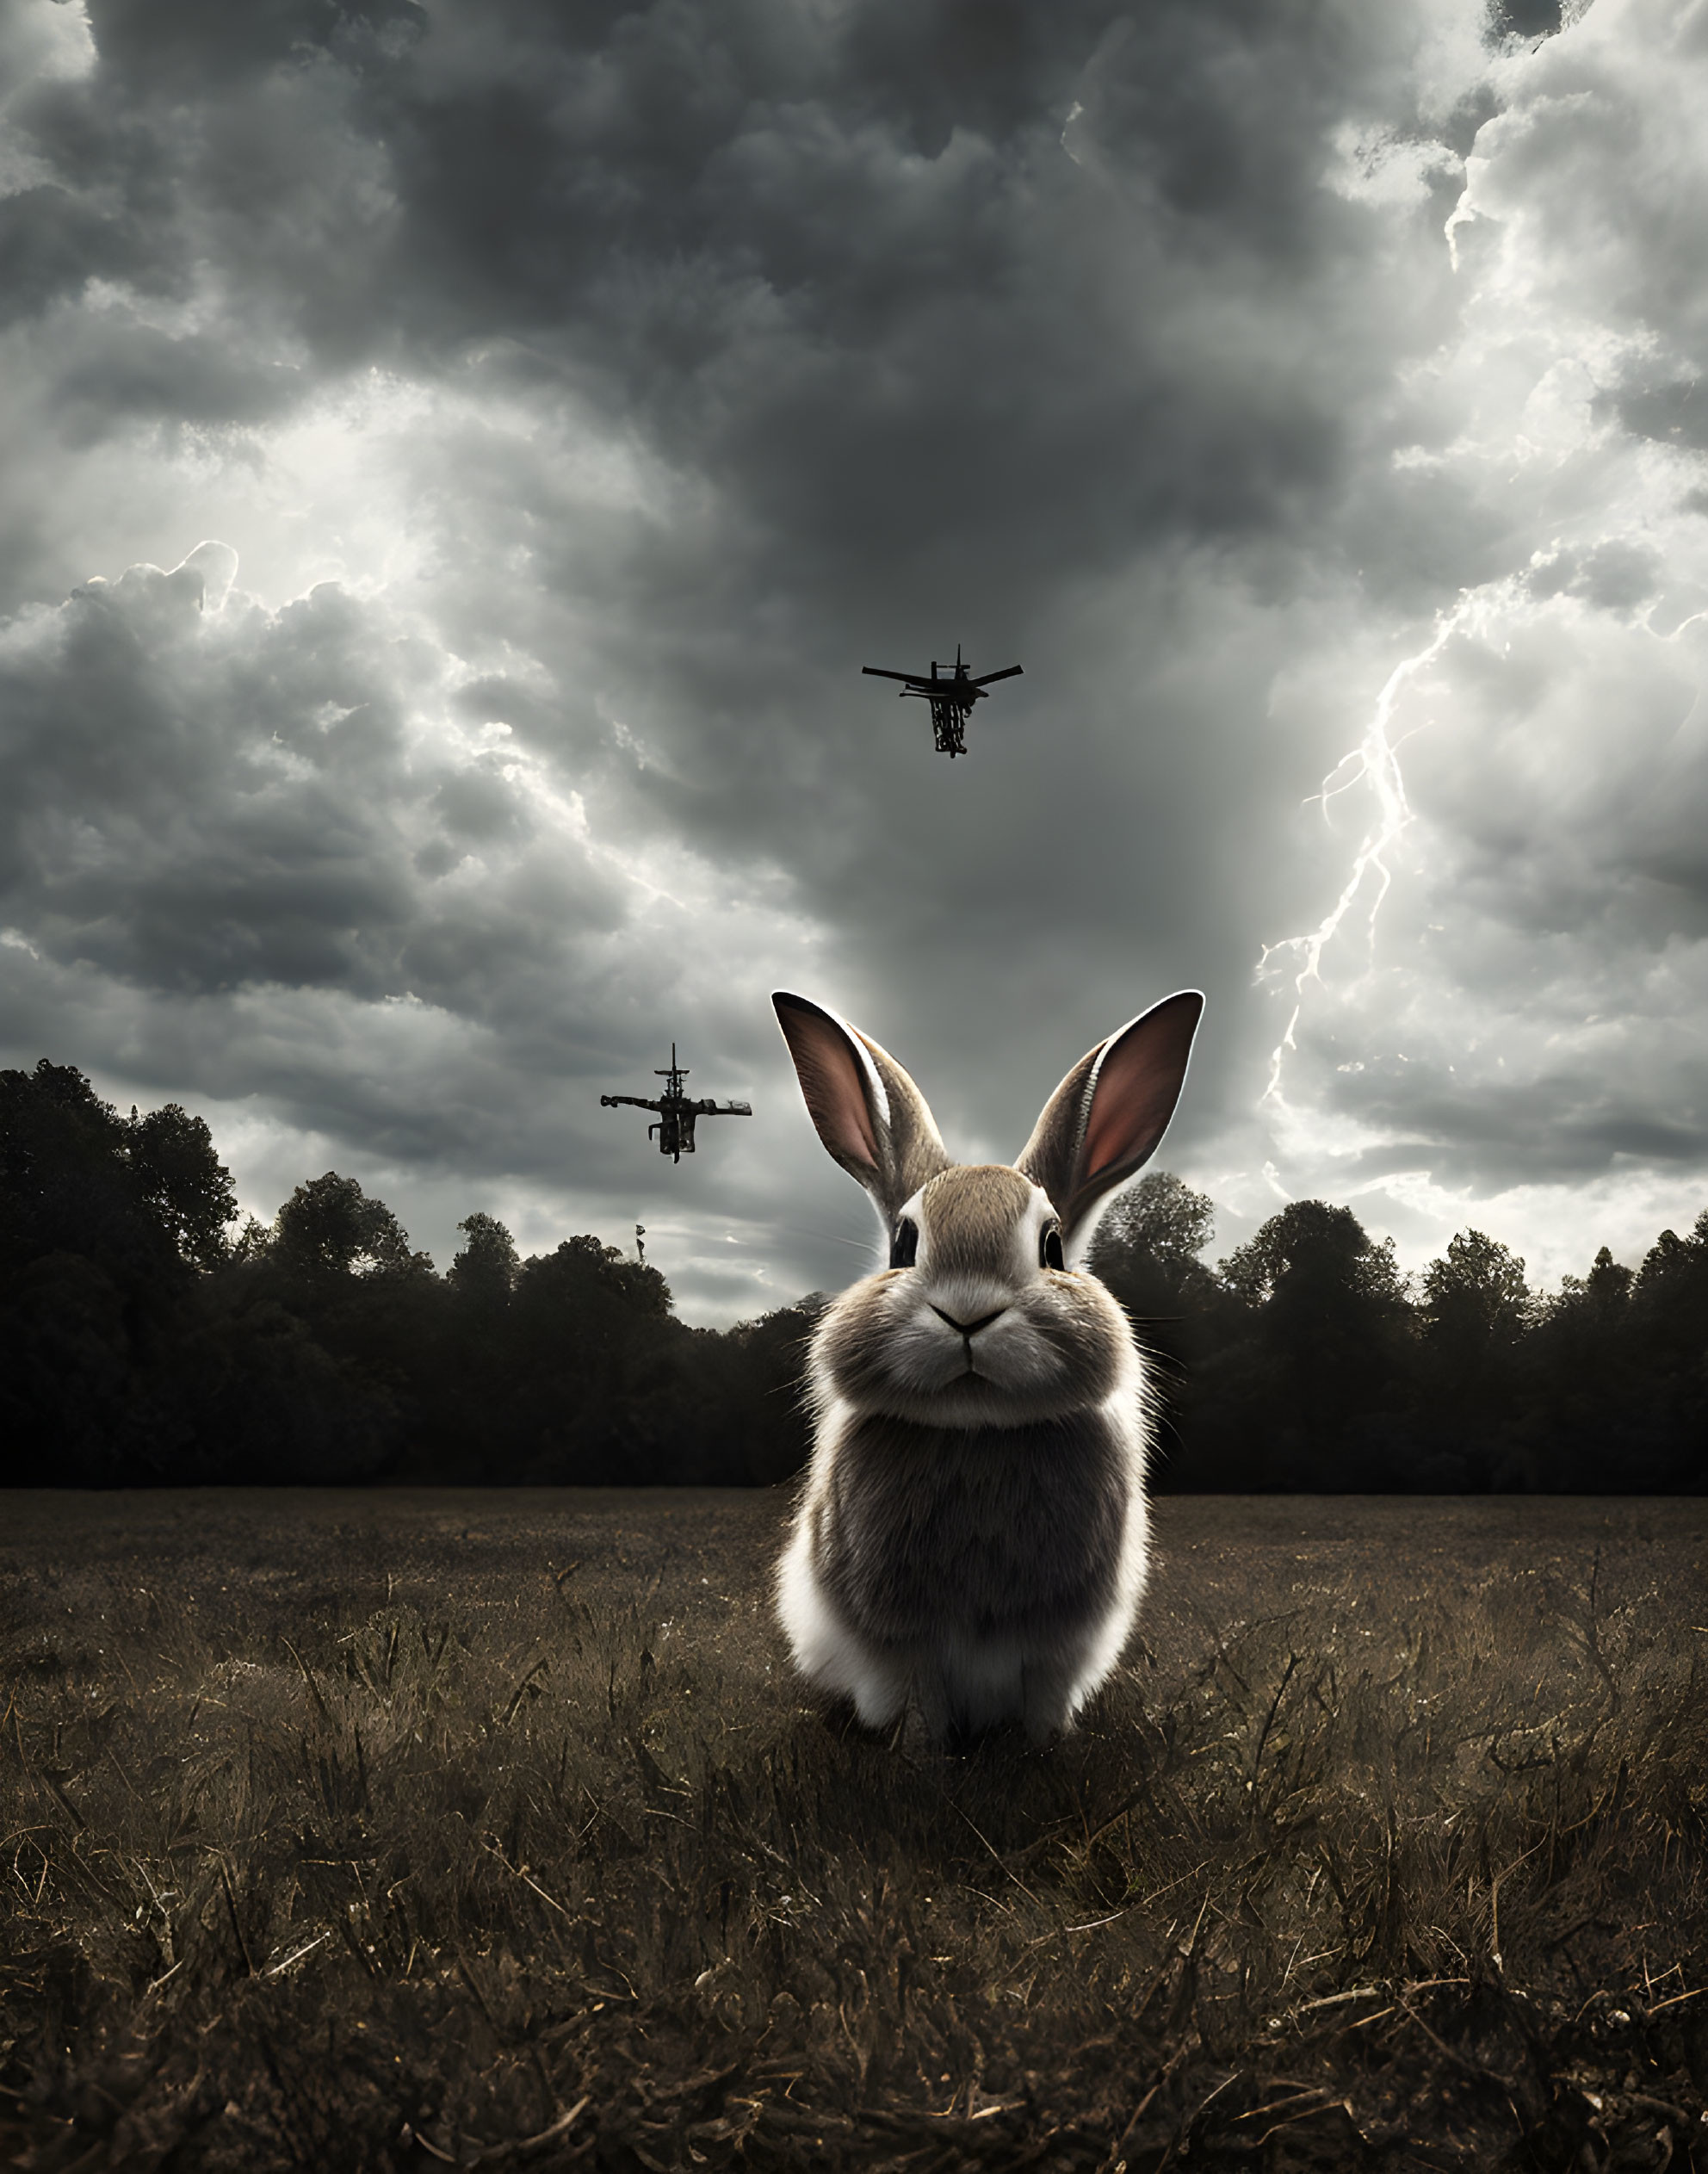 Fluffy rabbit in field under stormy sky with lightning and helicopters